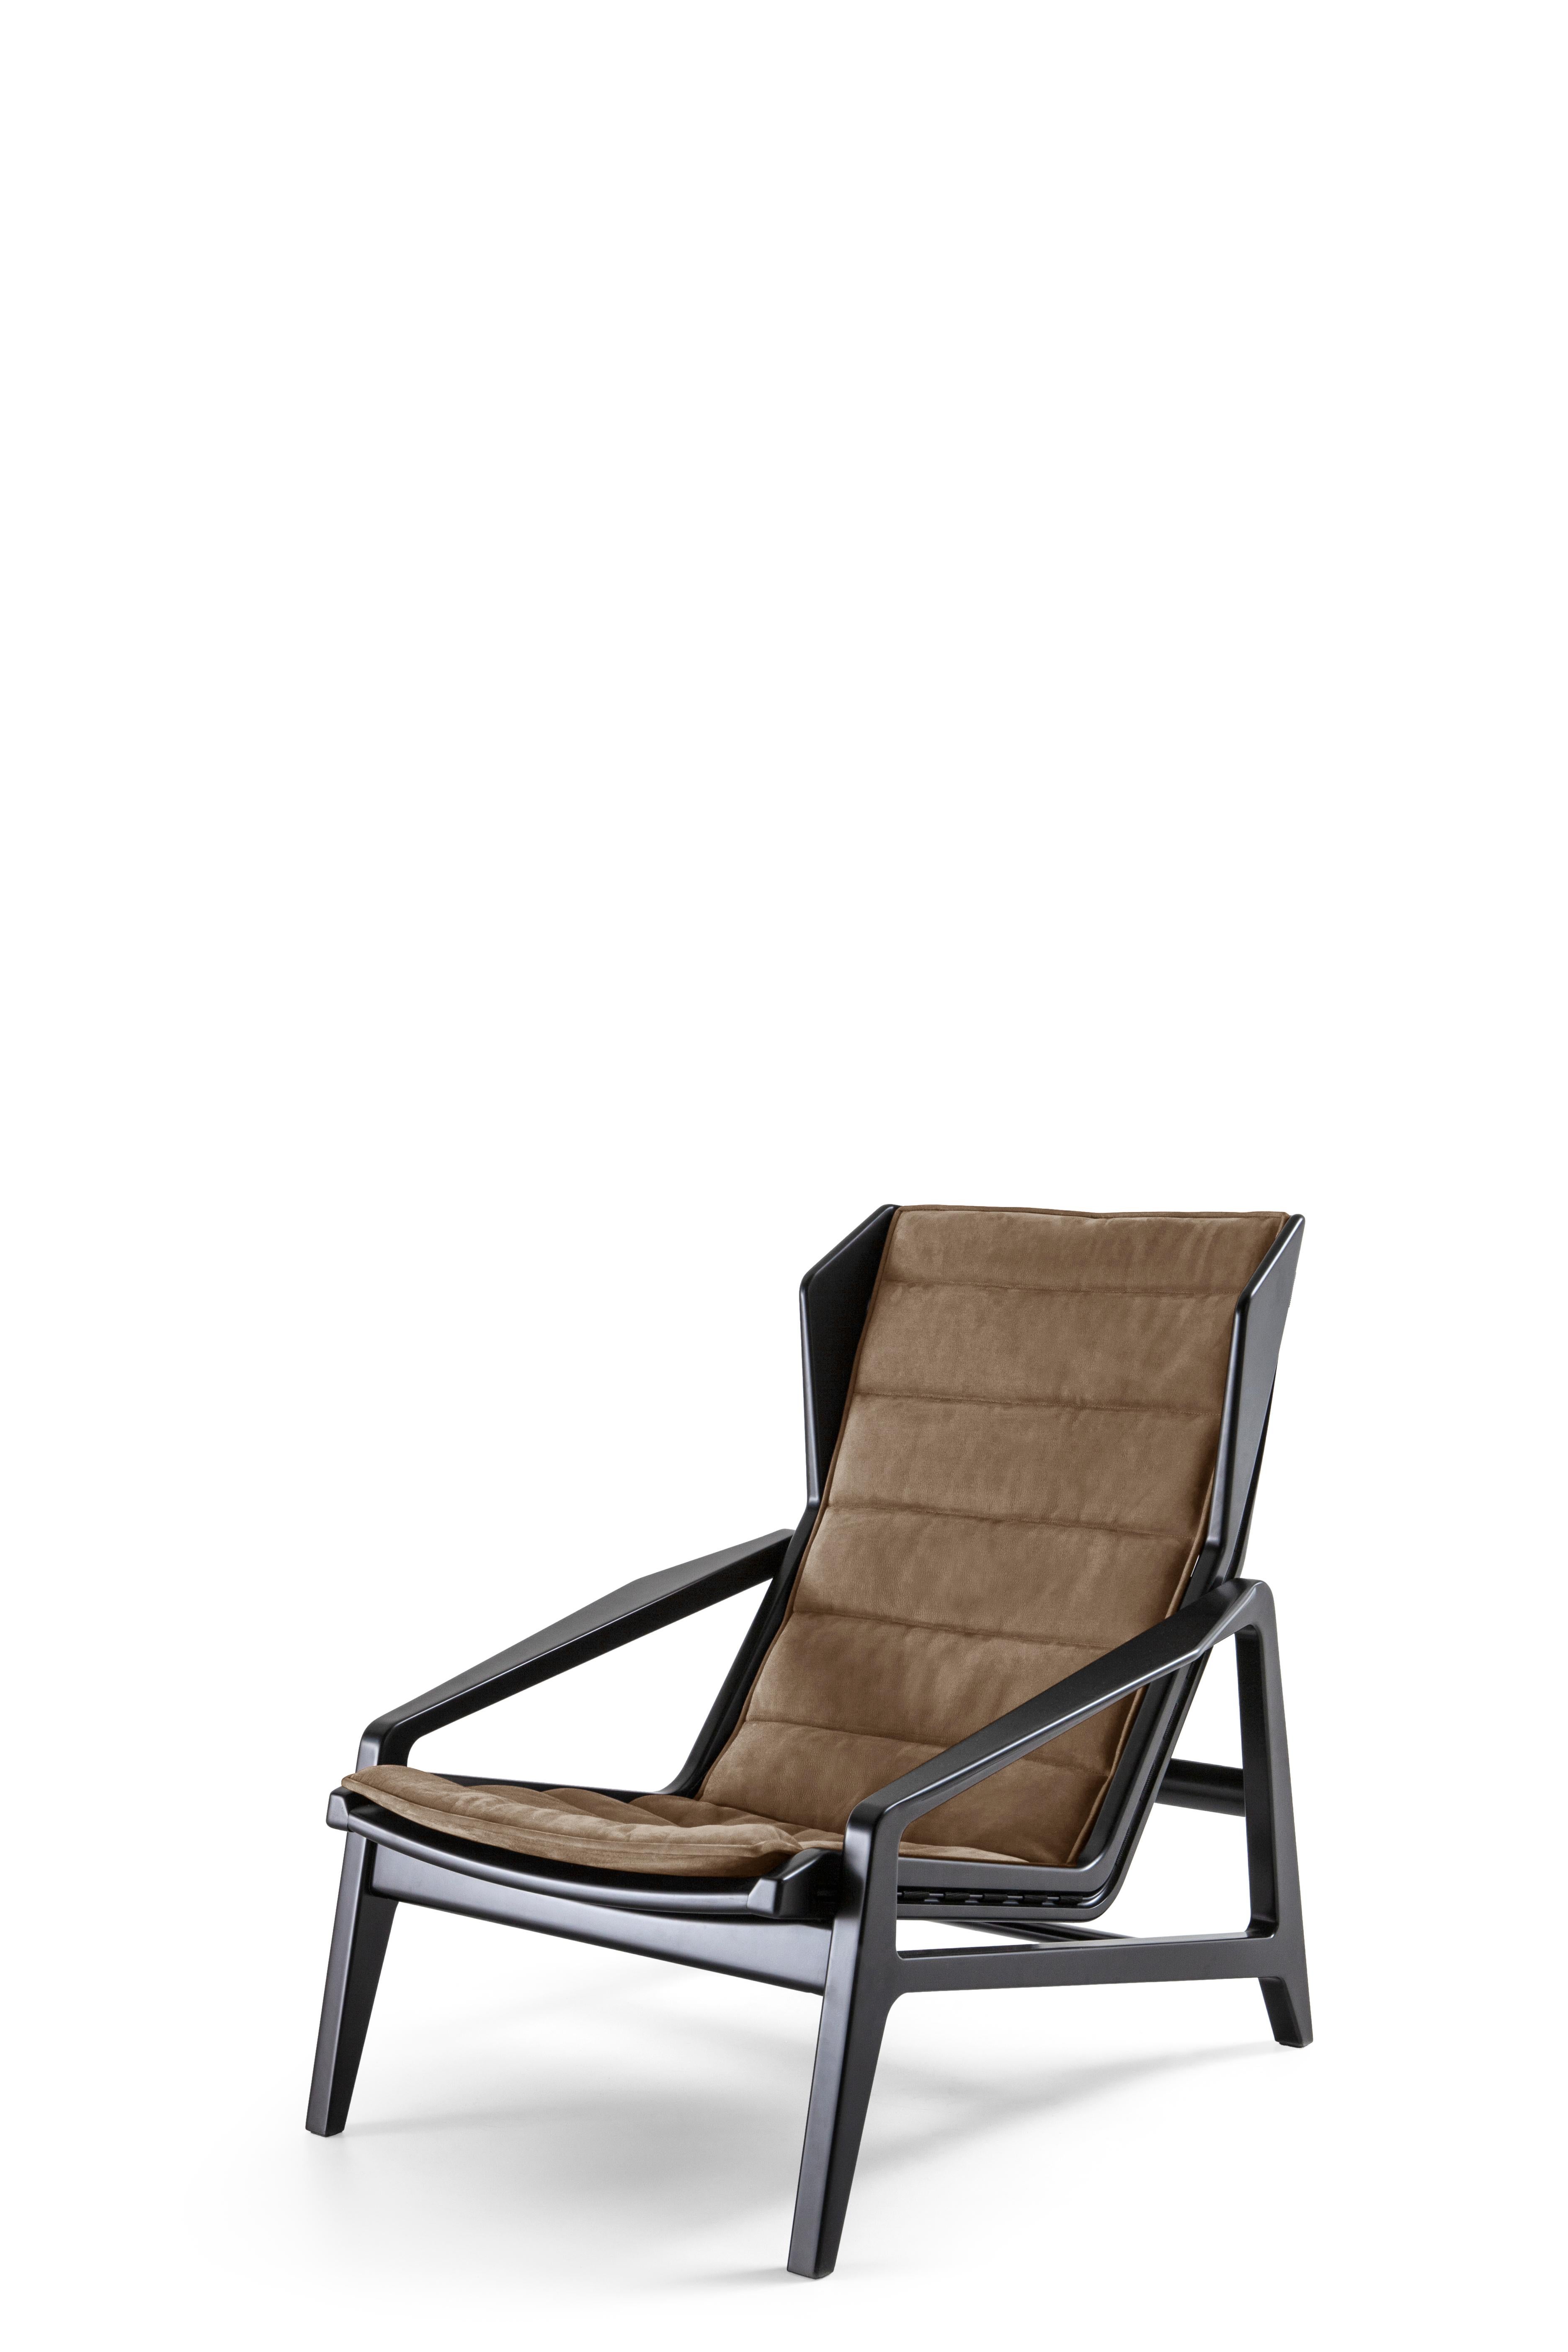 Gray (WD131_Grey) Armchair in Linen and Glossy Black Solid Wood Molteni&C by Gio Ponti - D.156.3 2